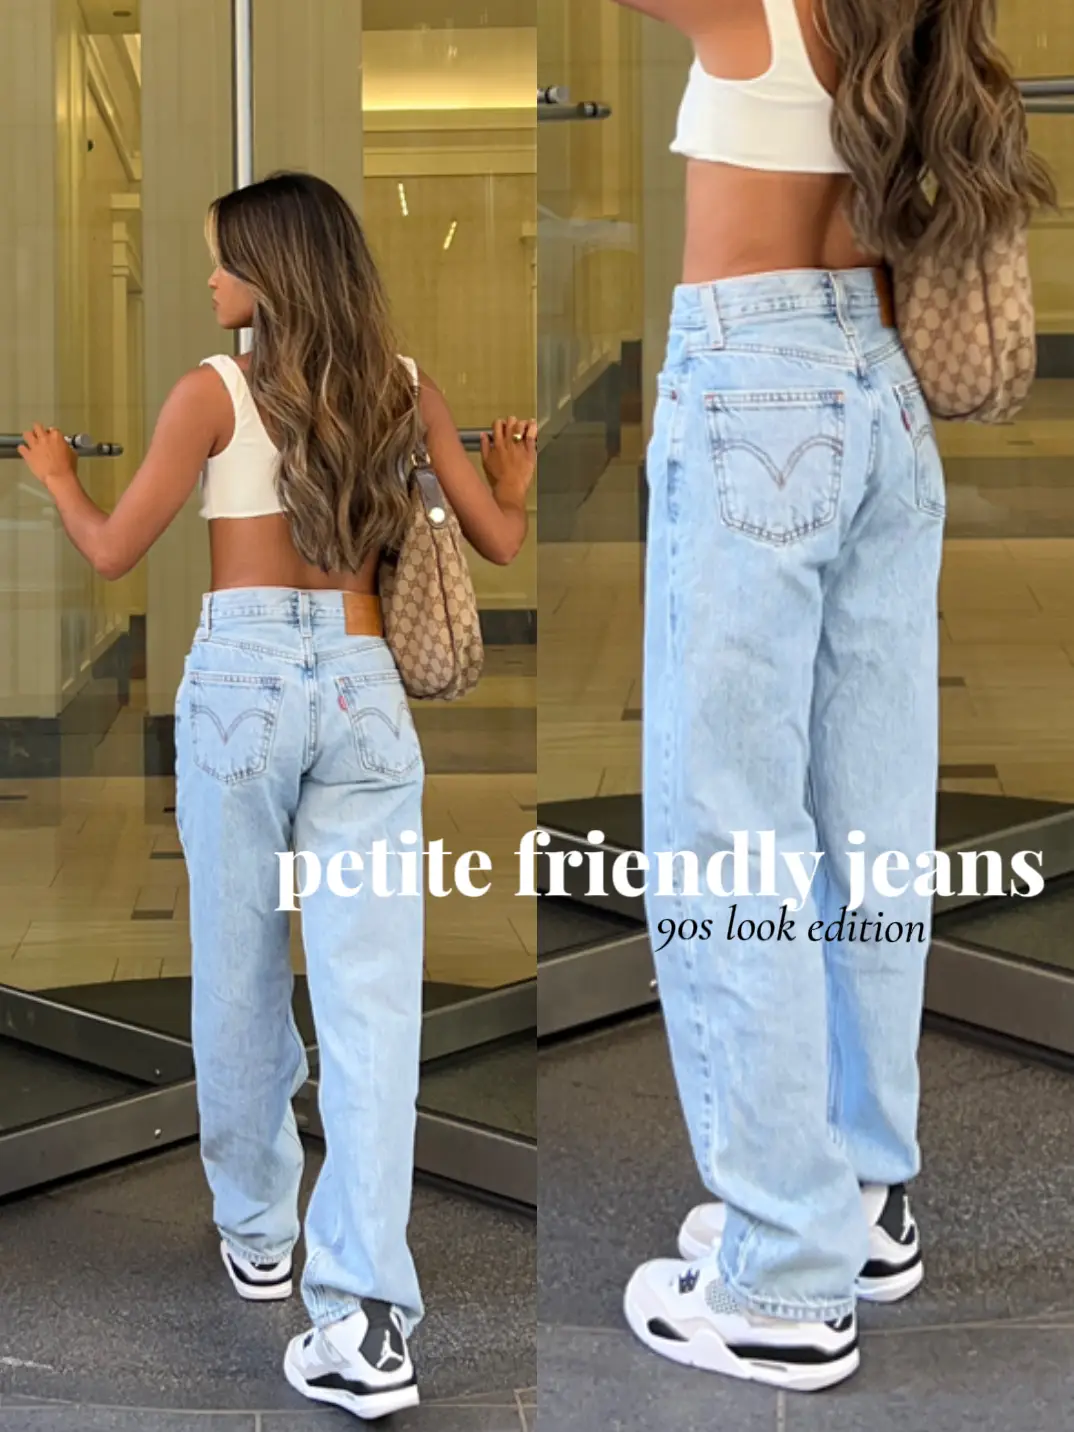 Where can I find similar pants that are actually petite-friendly